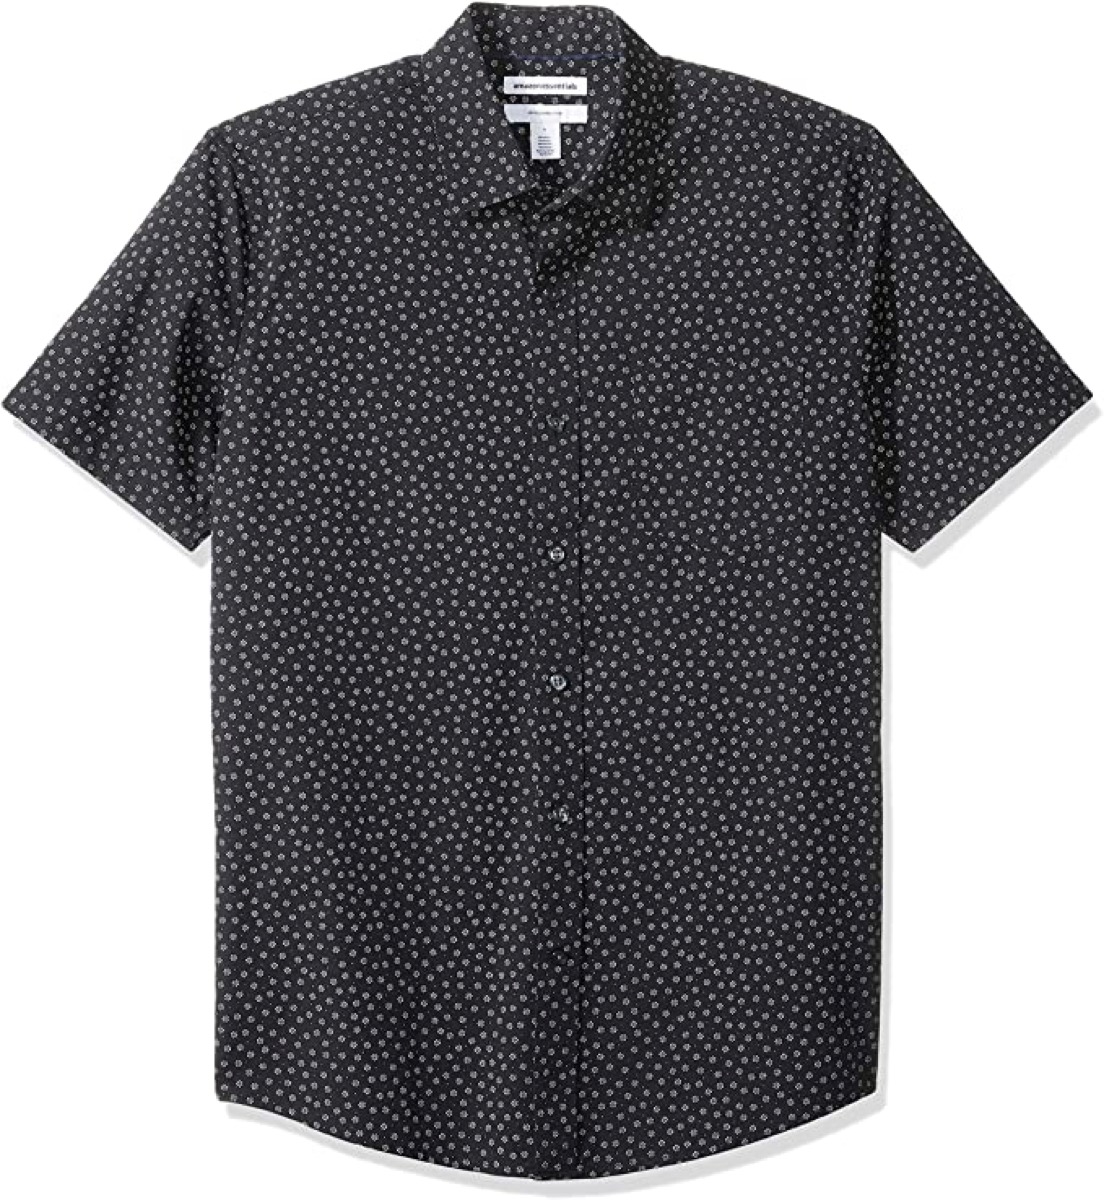 black button down shirt with white flower pattern